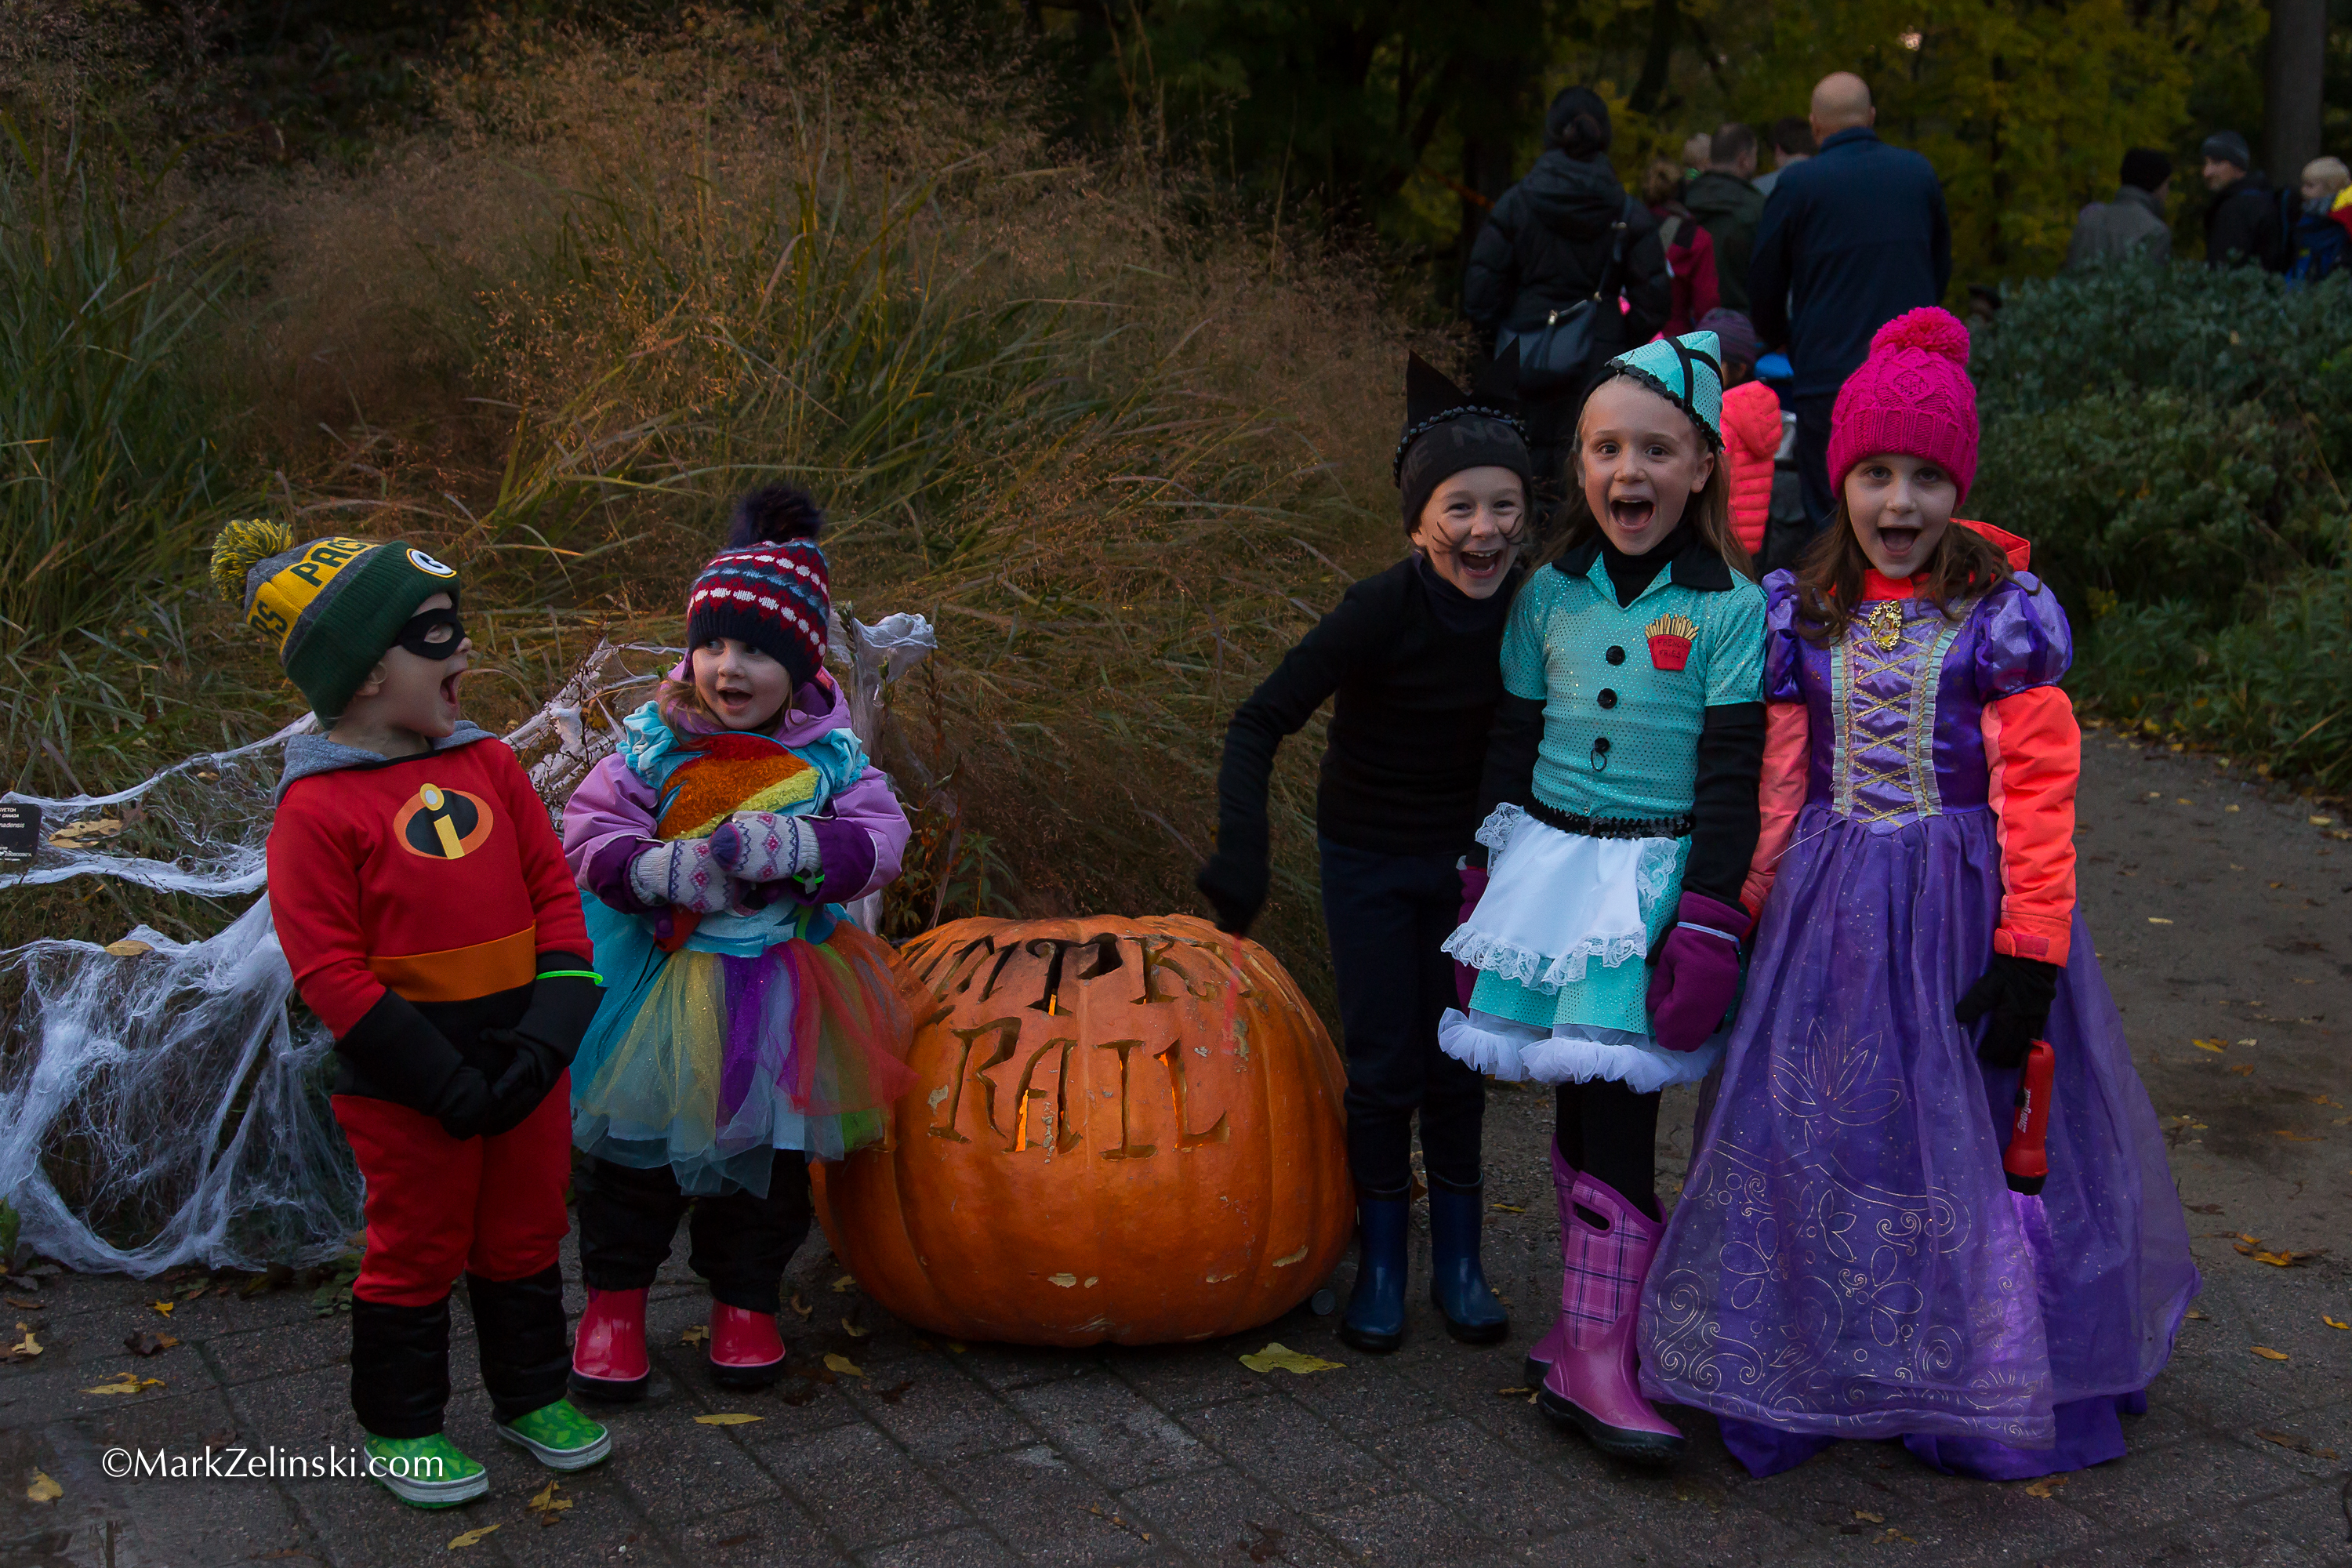 children in costume standing alongside a giant jack-o-lantern carved with the words "Pumpkin Trail"